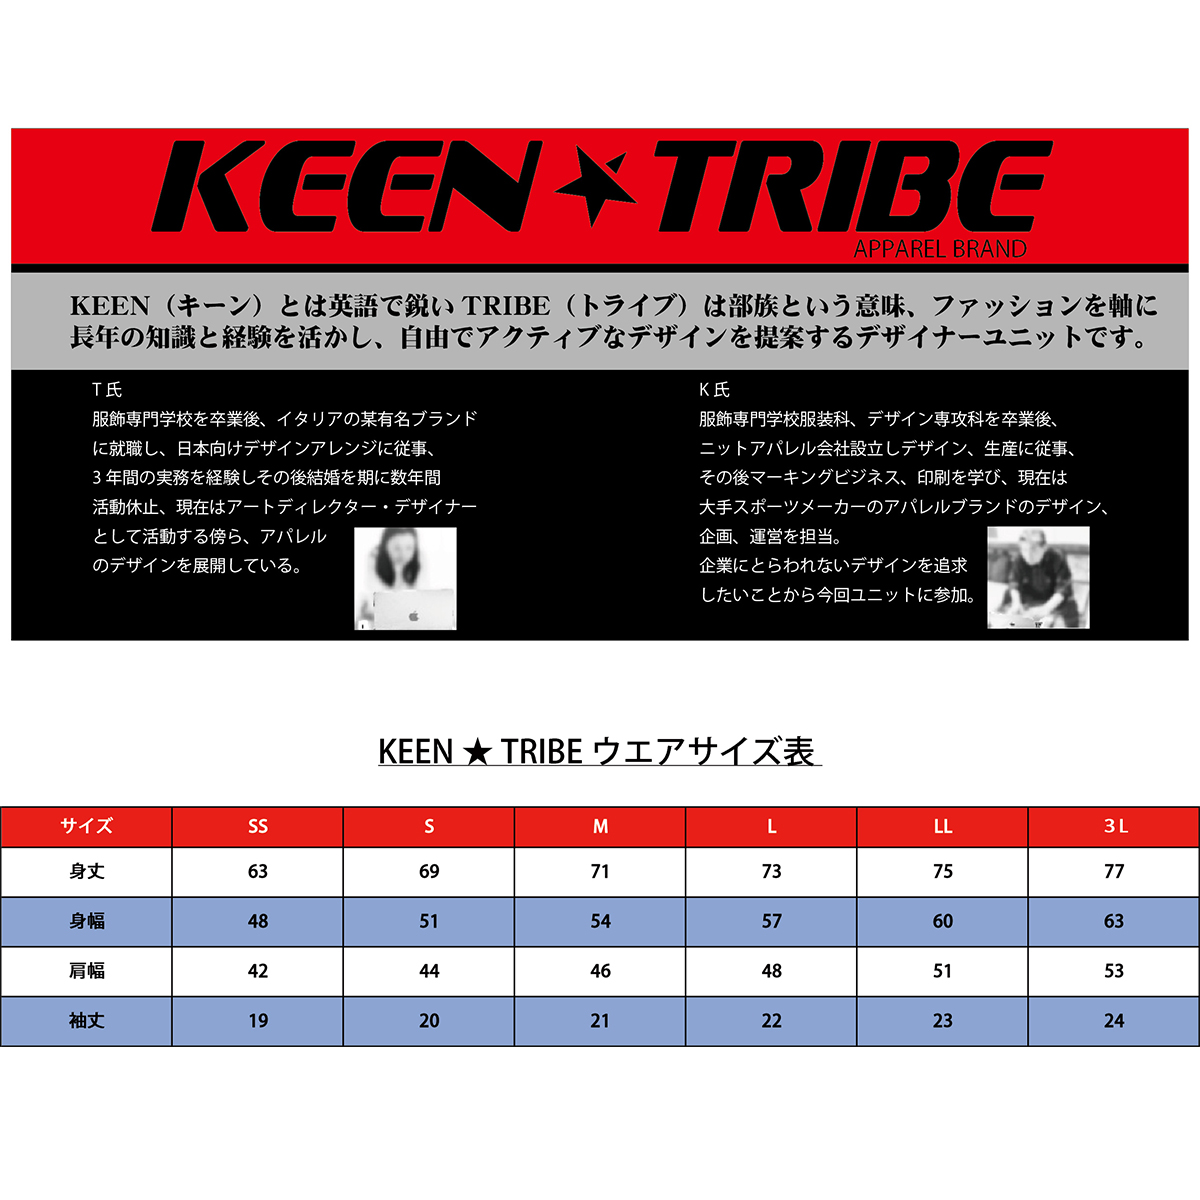 KEEN ★ TRIBE　KT-70(受注生産)